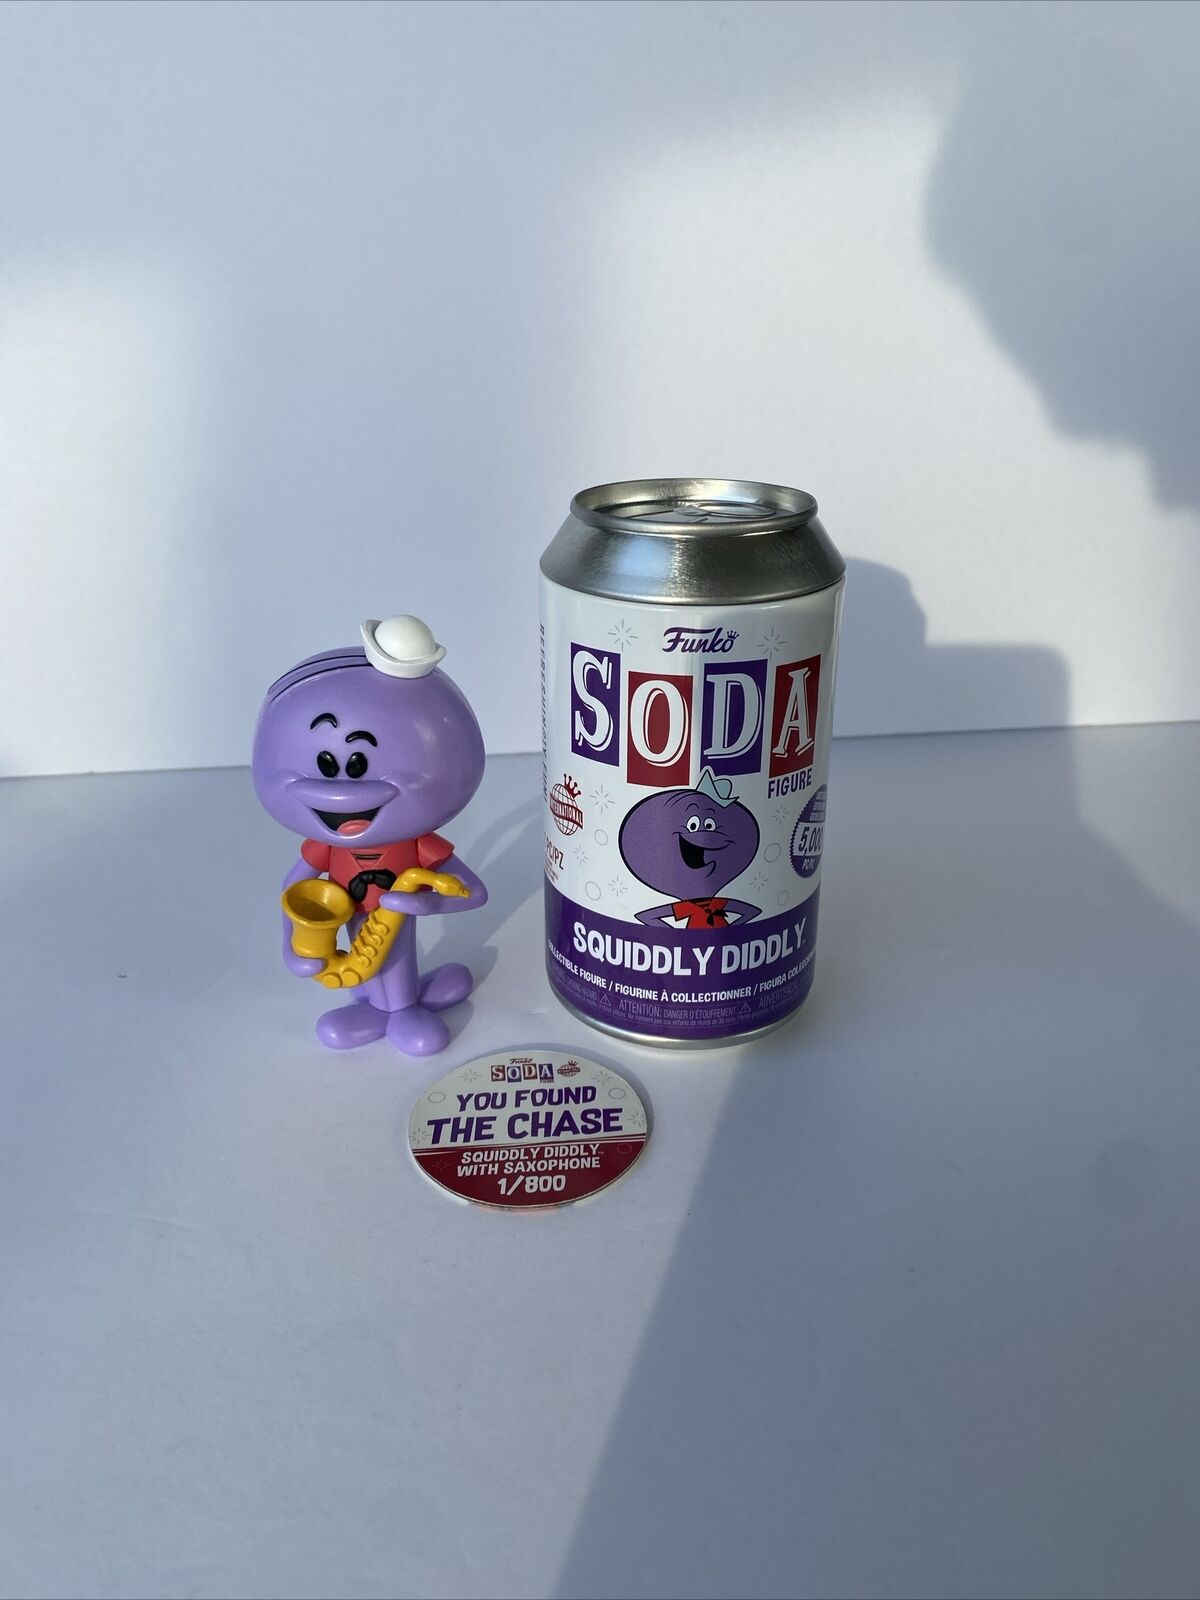 Funko Soda, Hanna Barbera, Squiddly Diddly with Sax, 1/800 International Chase